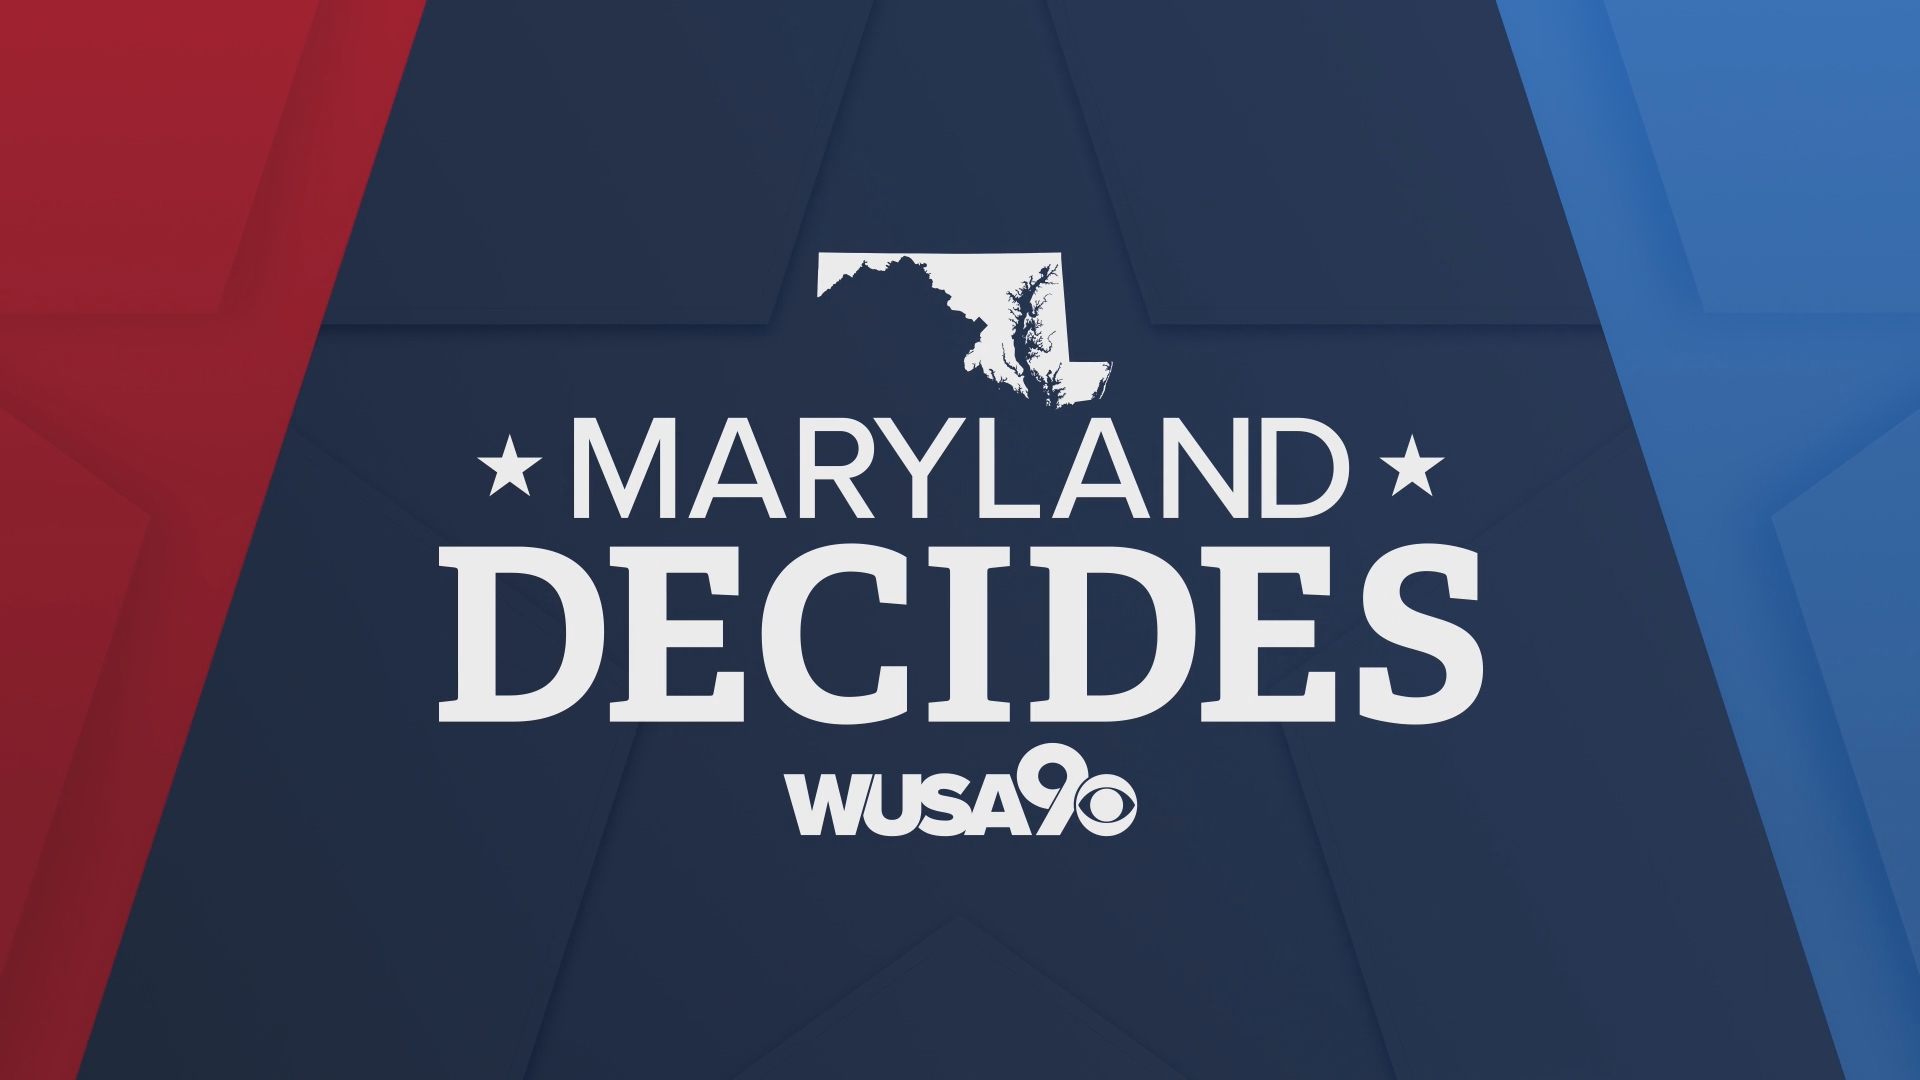 Polls closed in Maryland just three hours ago and a few of the races have already called a winner.